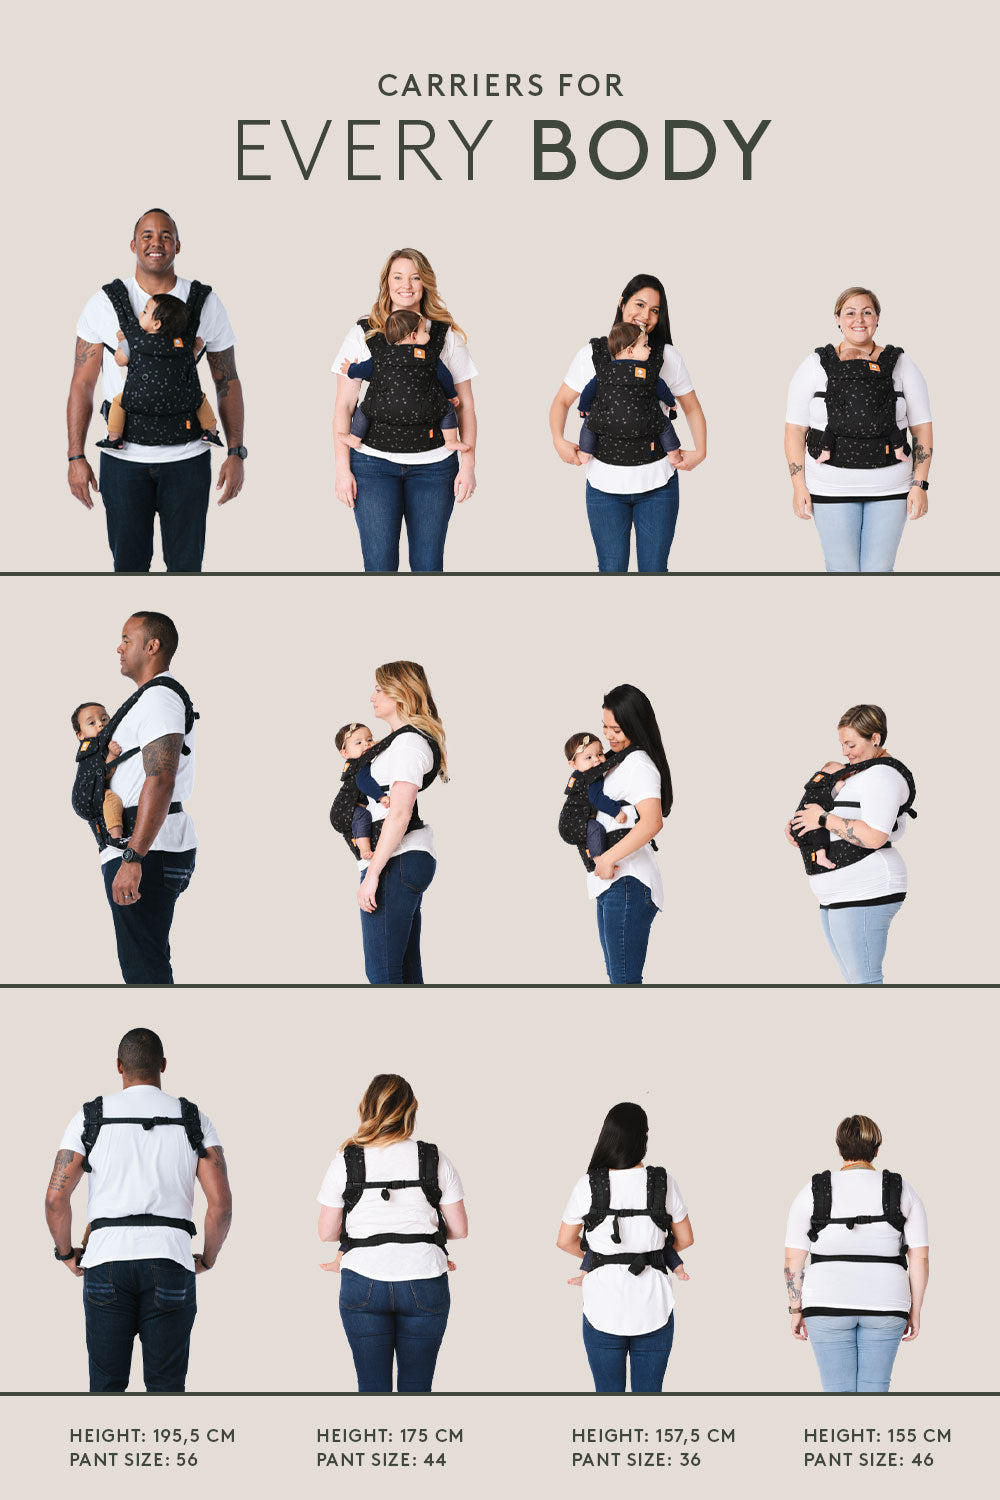 Everblue - Cotton Explore Baby Carrier